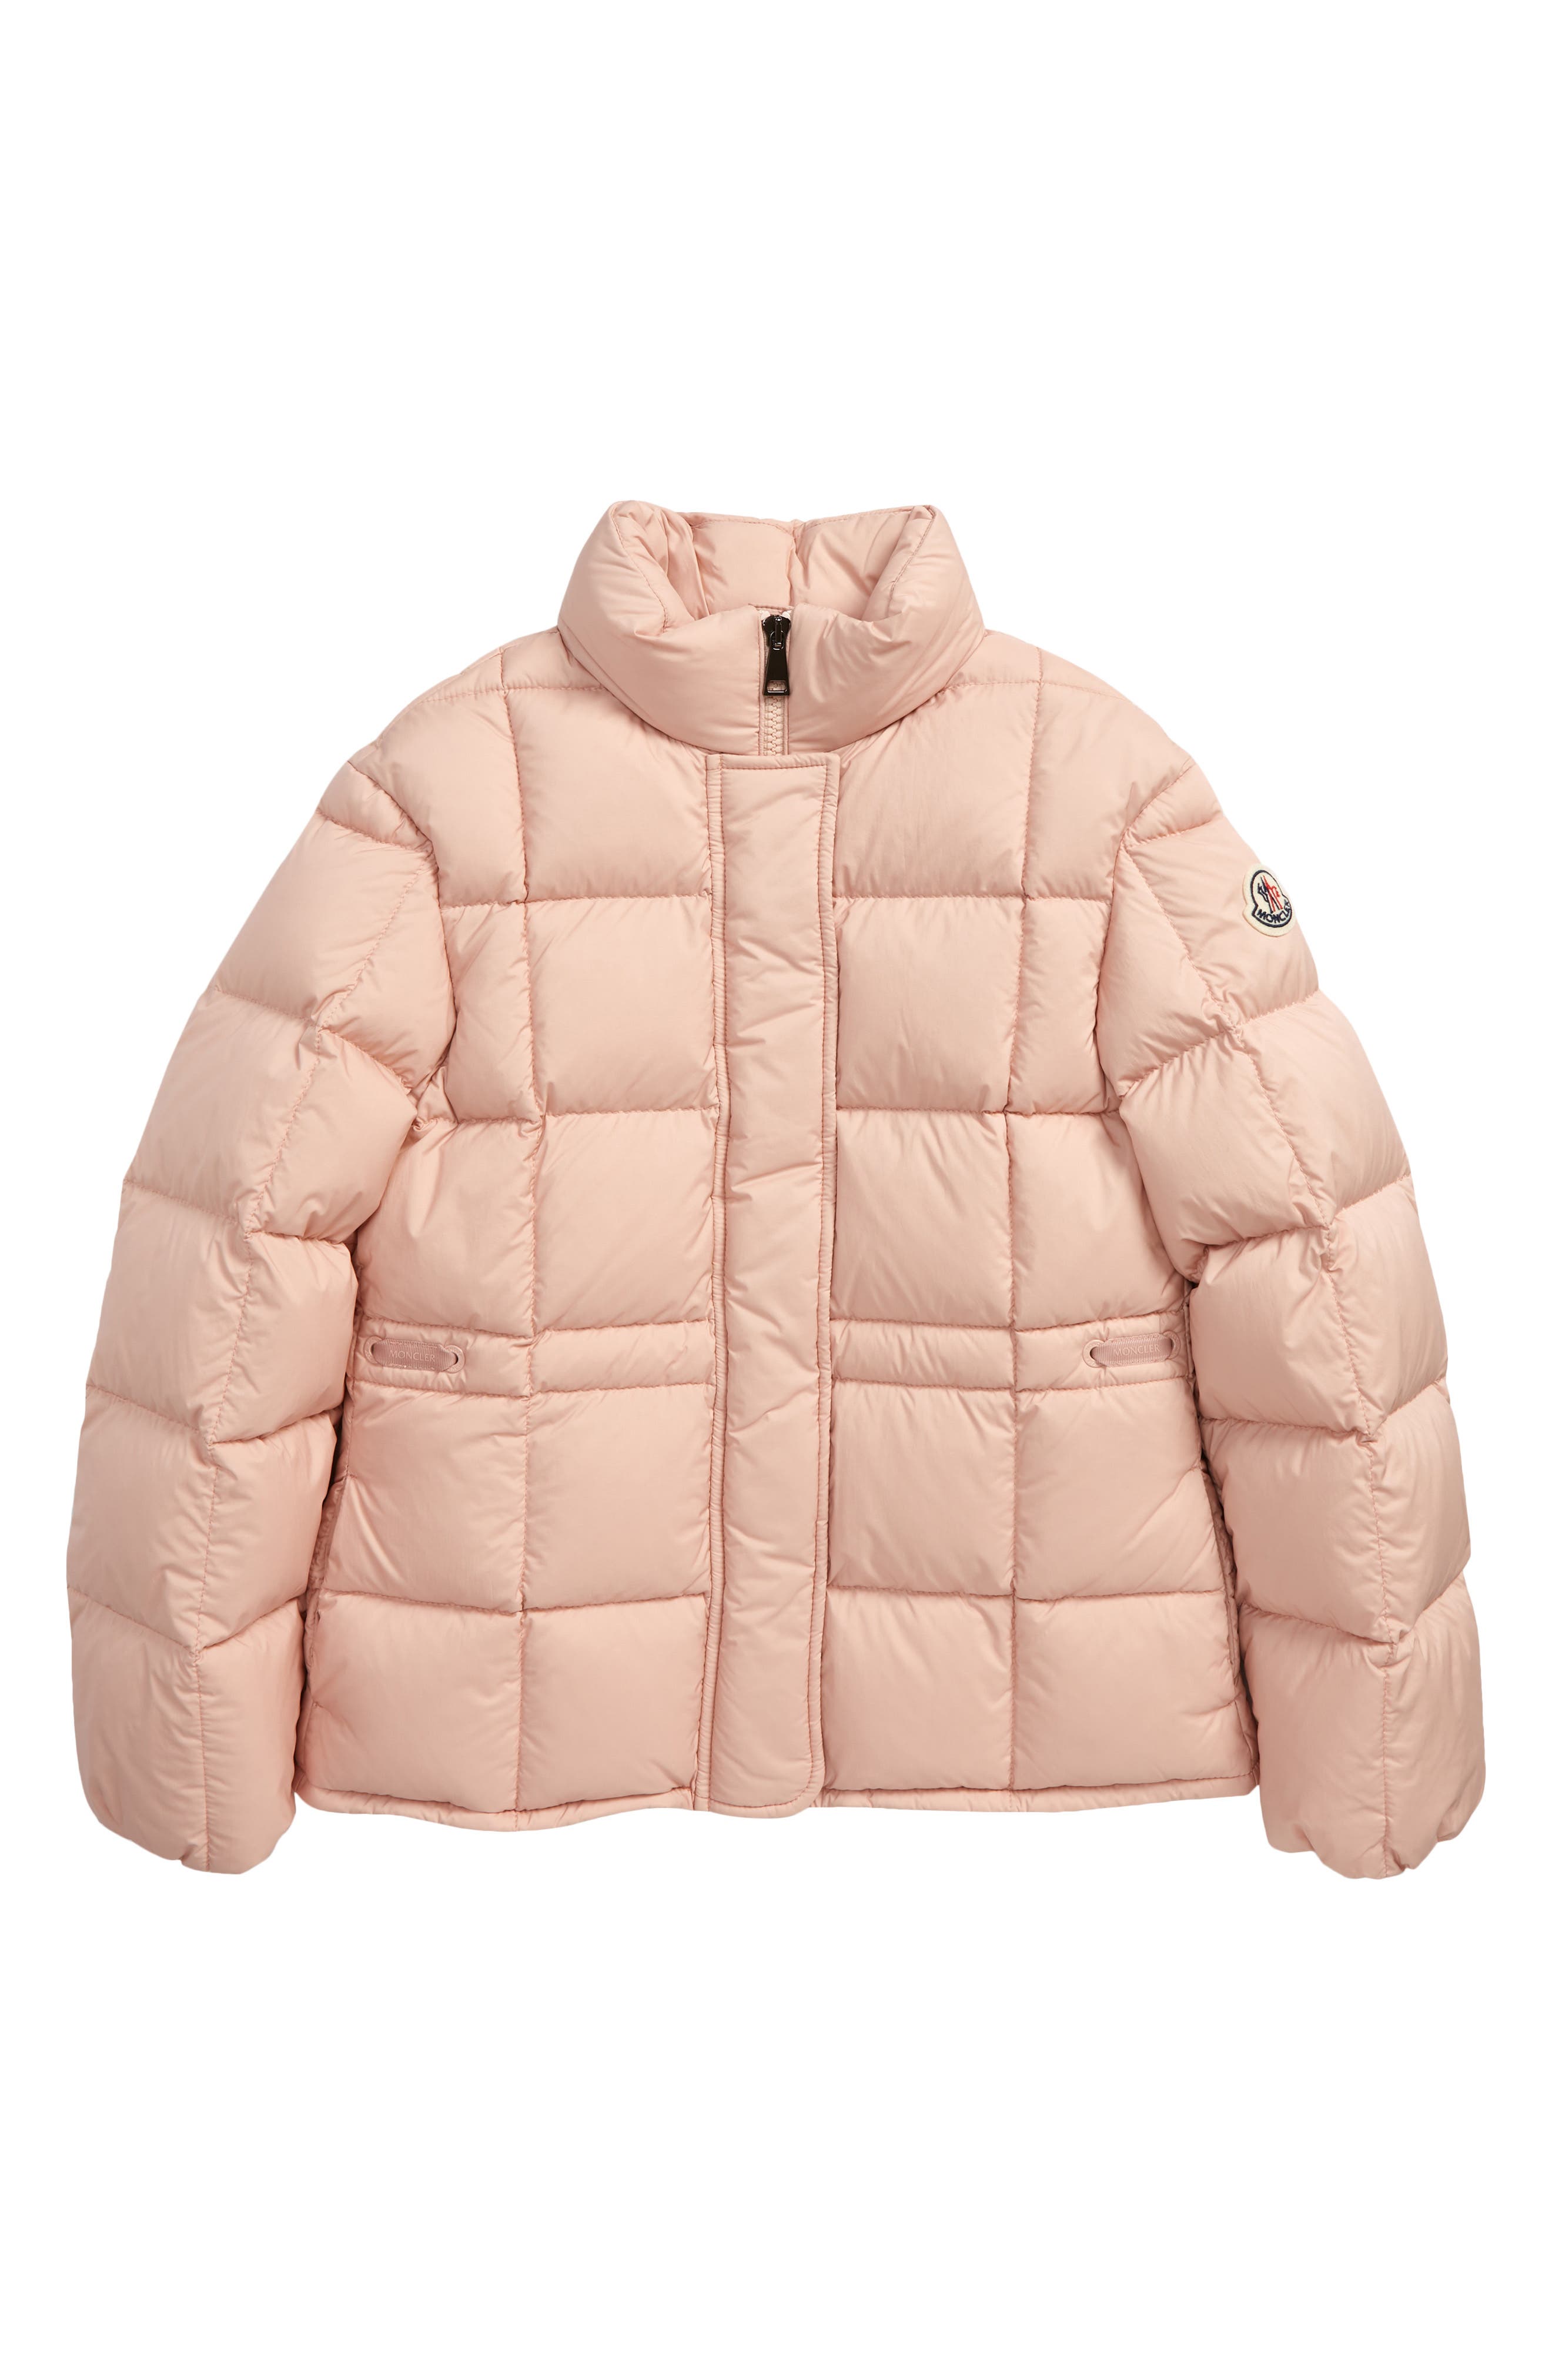 girls packable down jacket